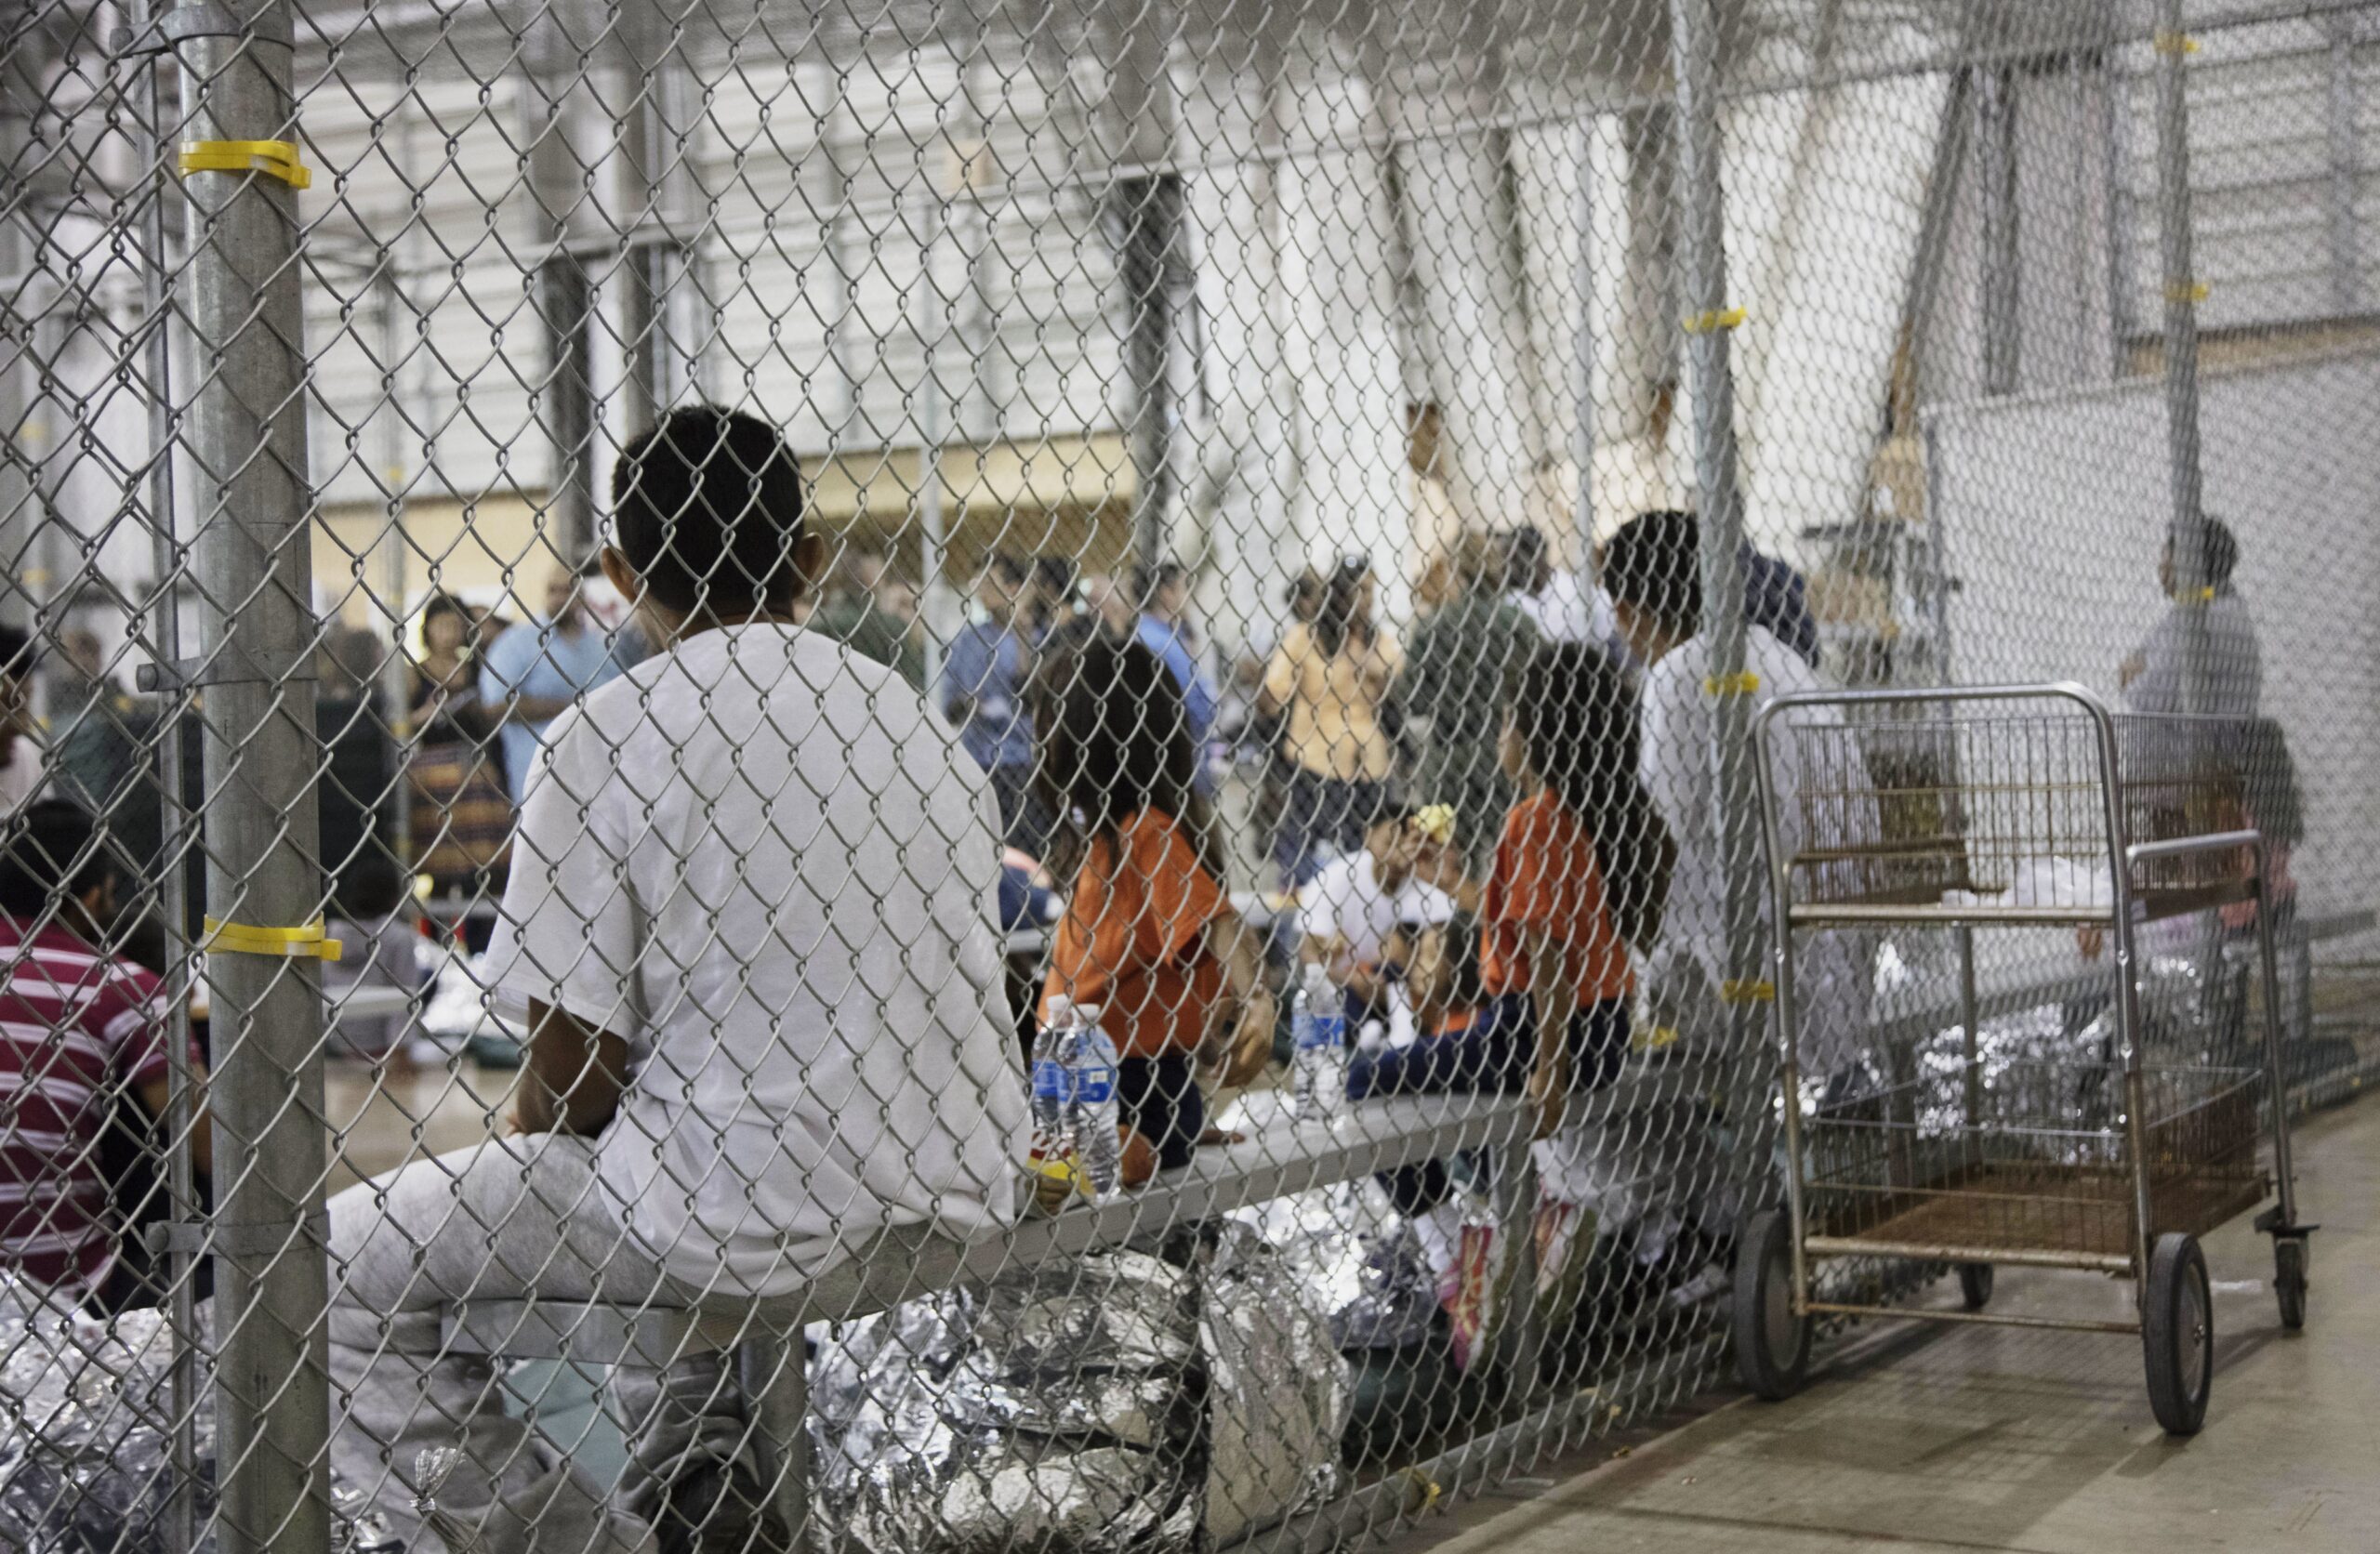 immigrants who've been taken into custody sit in one of the cages at a facility in McAllen, Texas